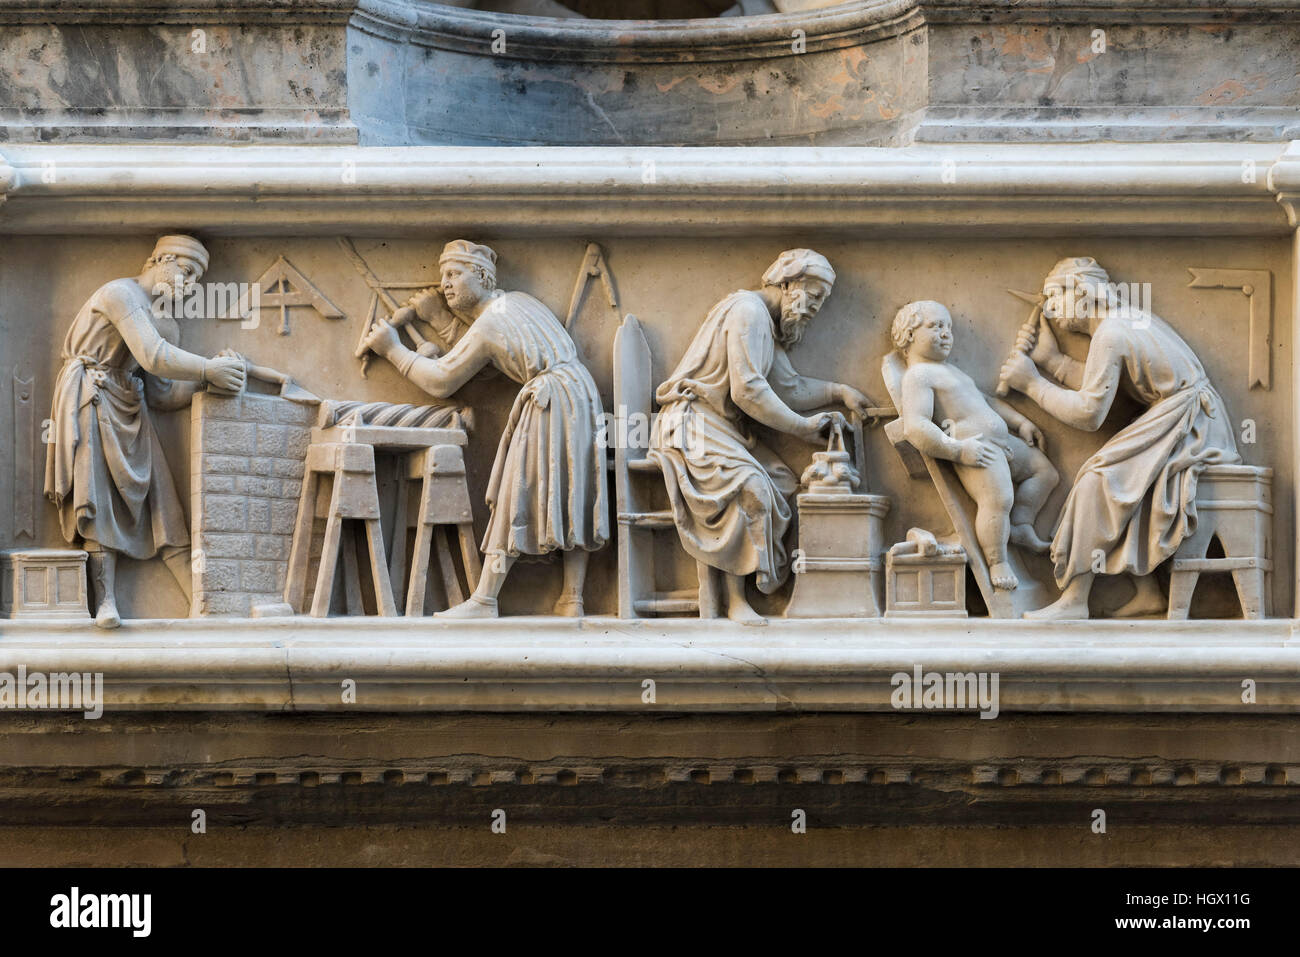 Florence. Italy. Marble relief depicting stonemasons, wood carvers and sculptors on the façade of Orsanmichele. Stock Photo